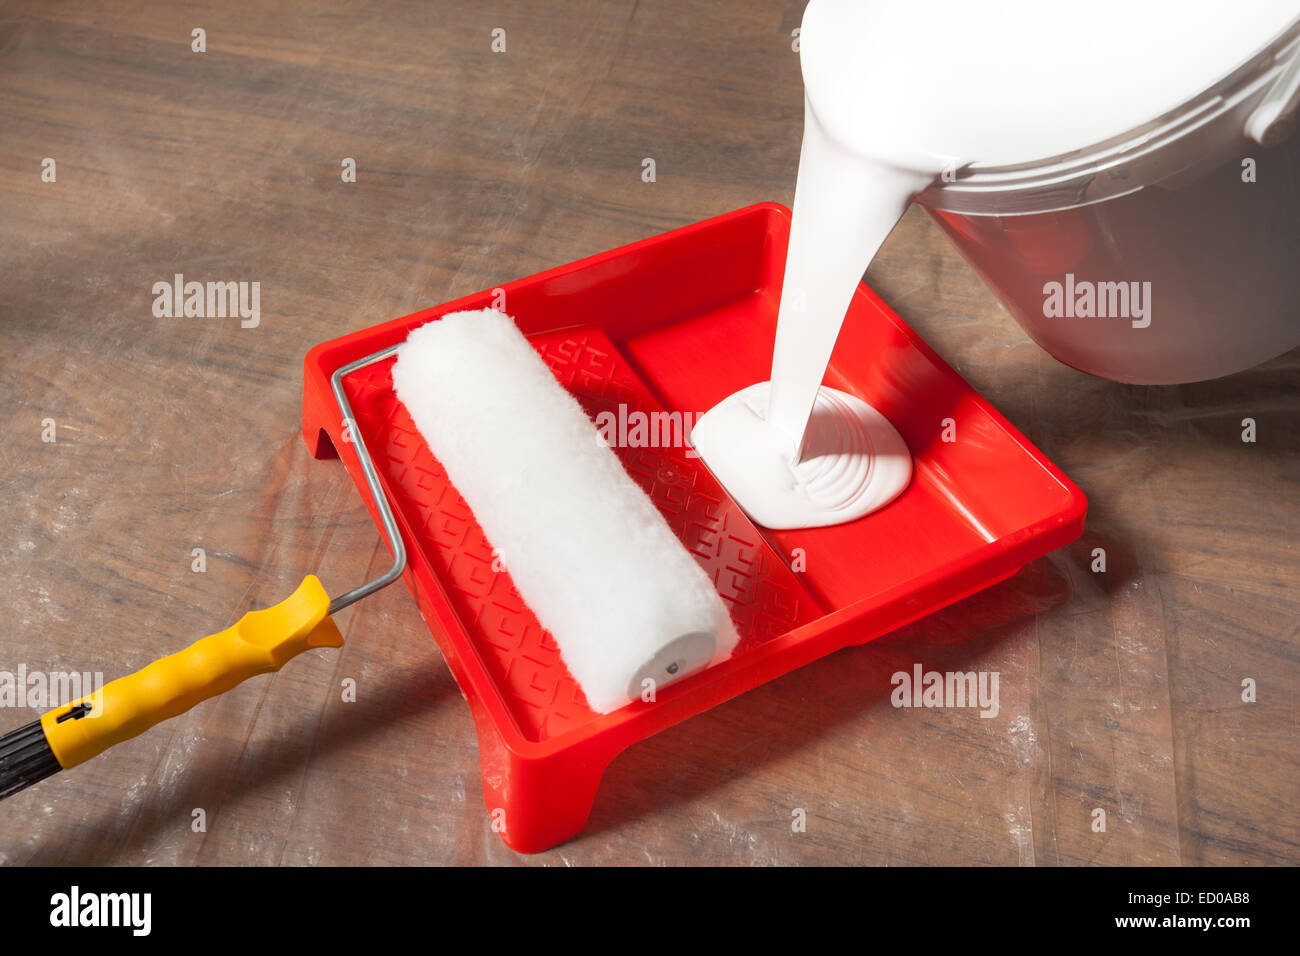 Preparing for painting, pouring paint in a tray. Stock Photo